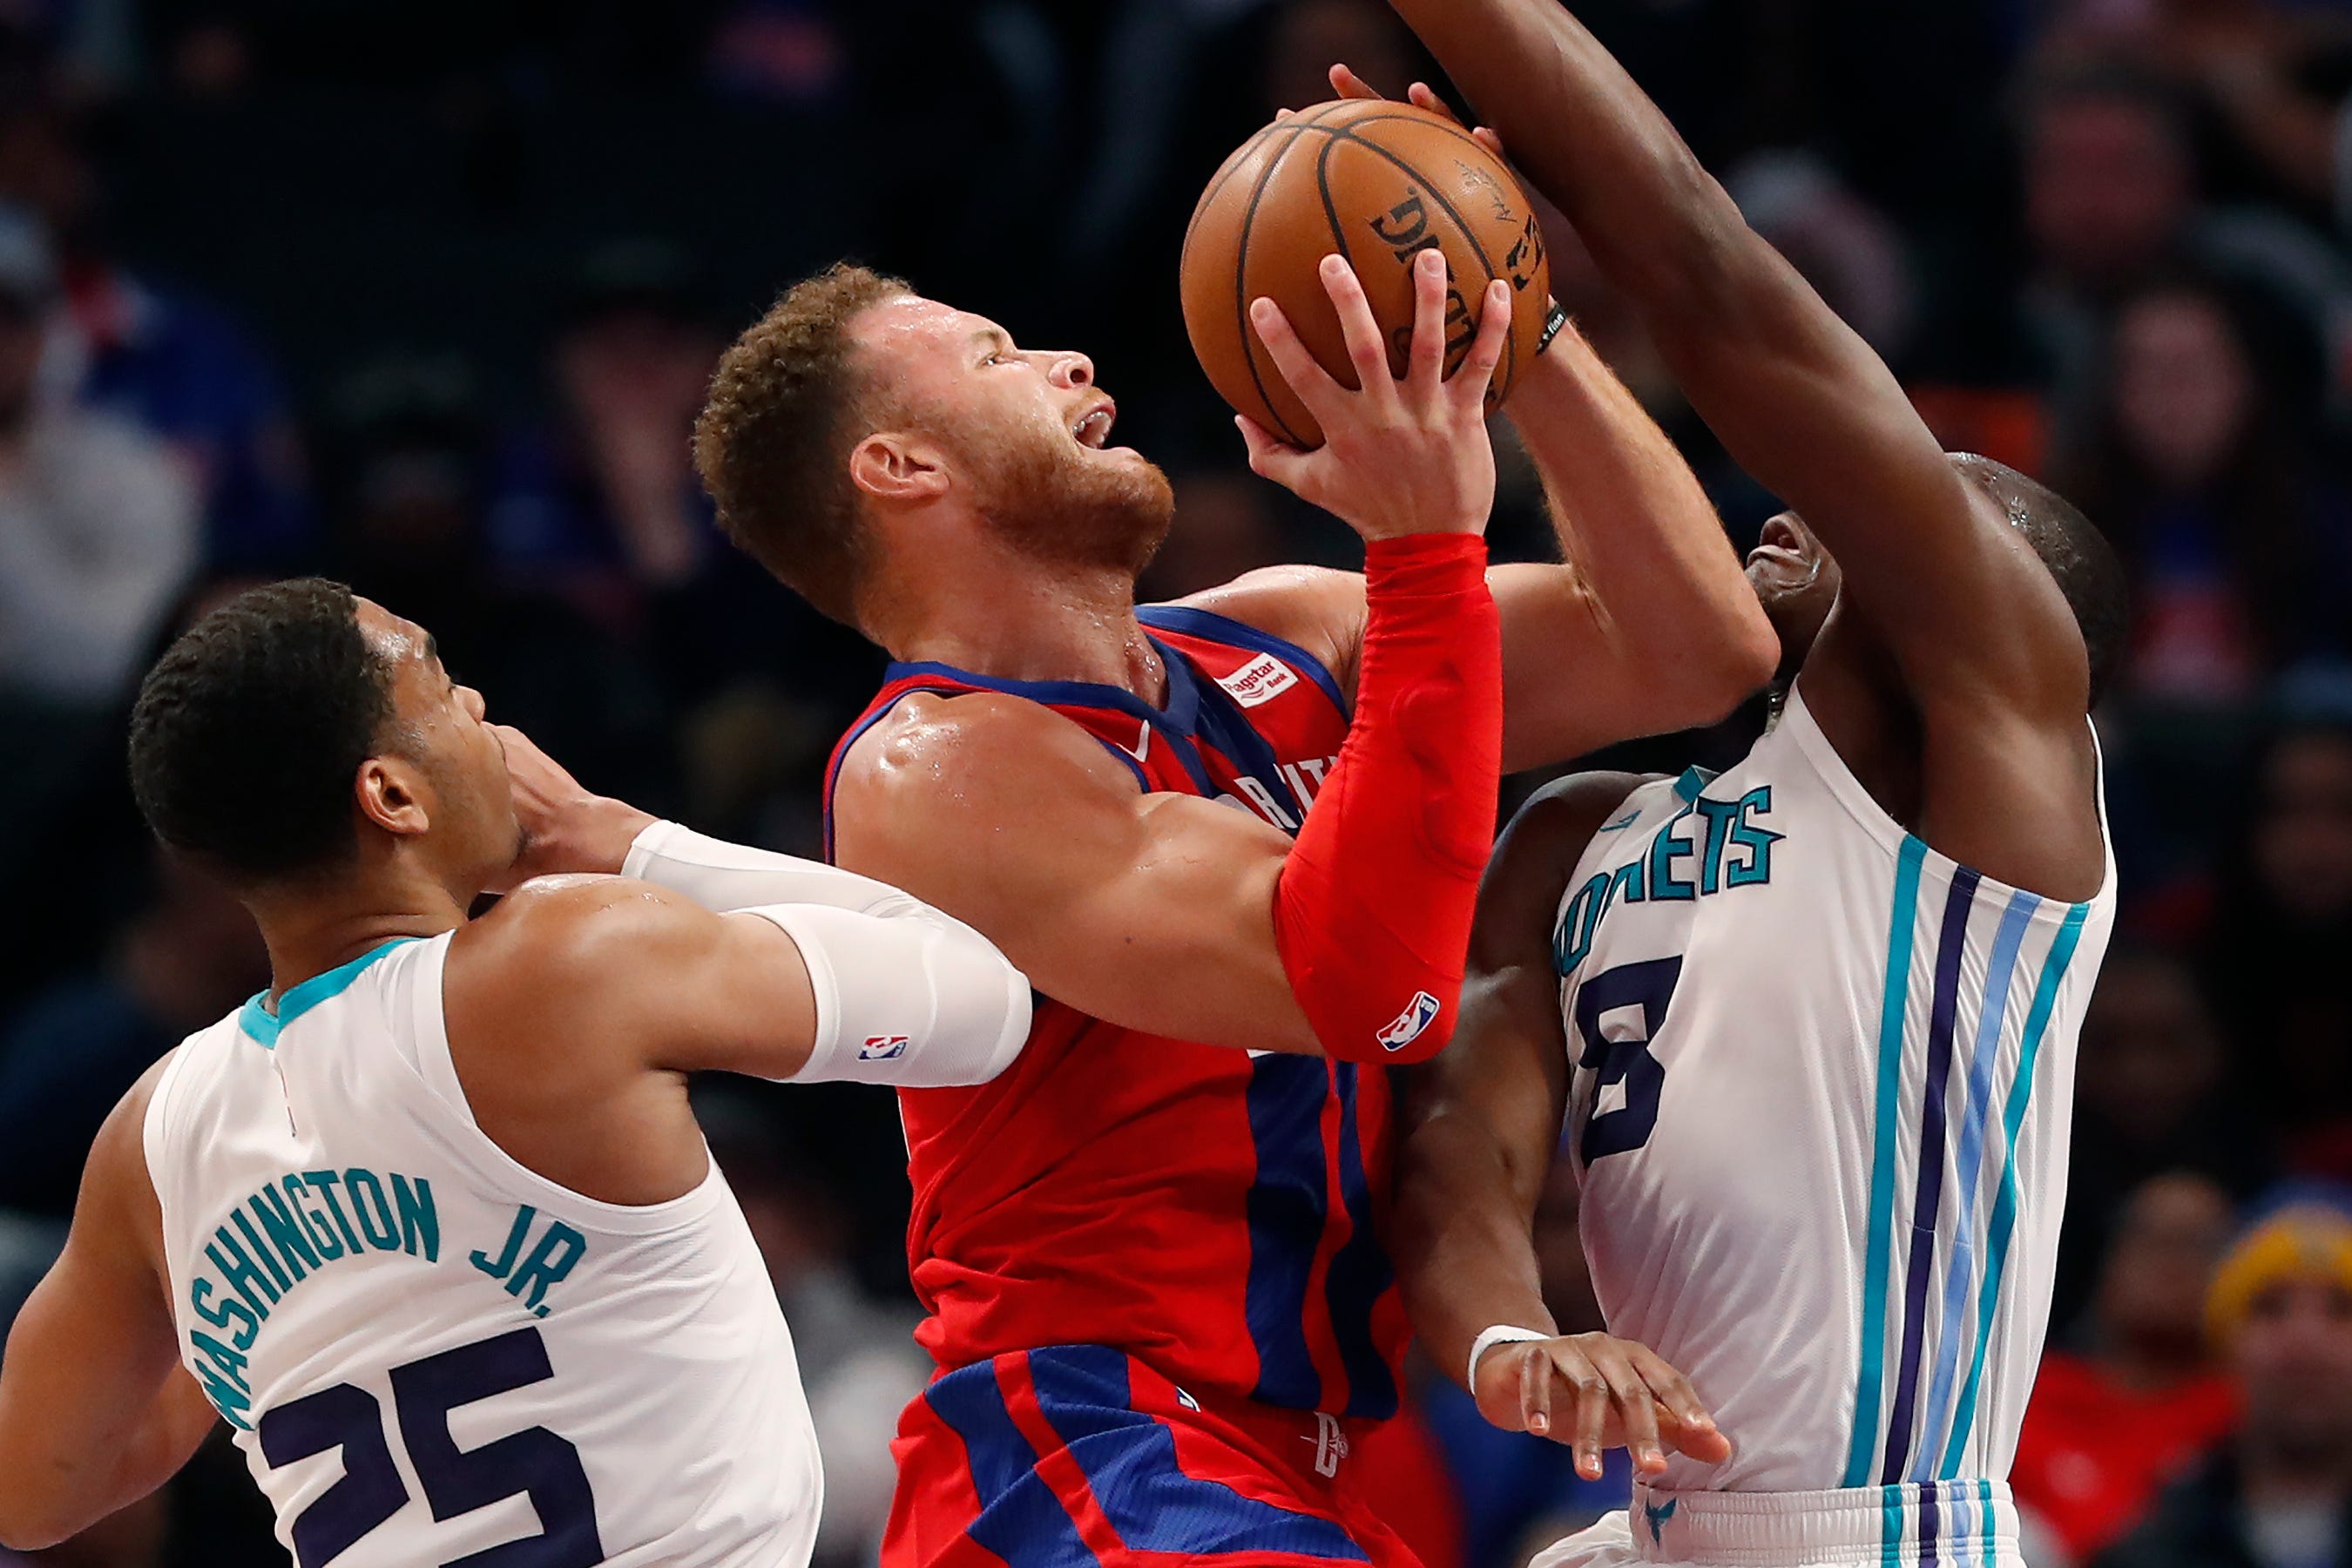 Pistons forward Blake Griffin attempts a shot between the defense of Hornets forward PJ Washington (25) and center Bismack Biyombo.